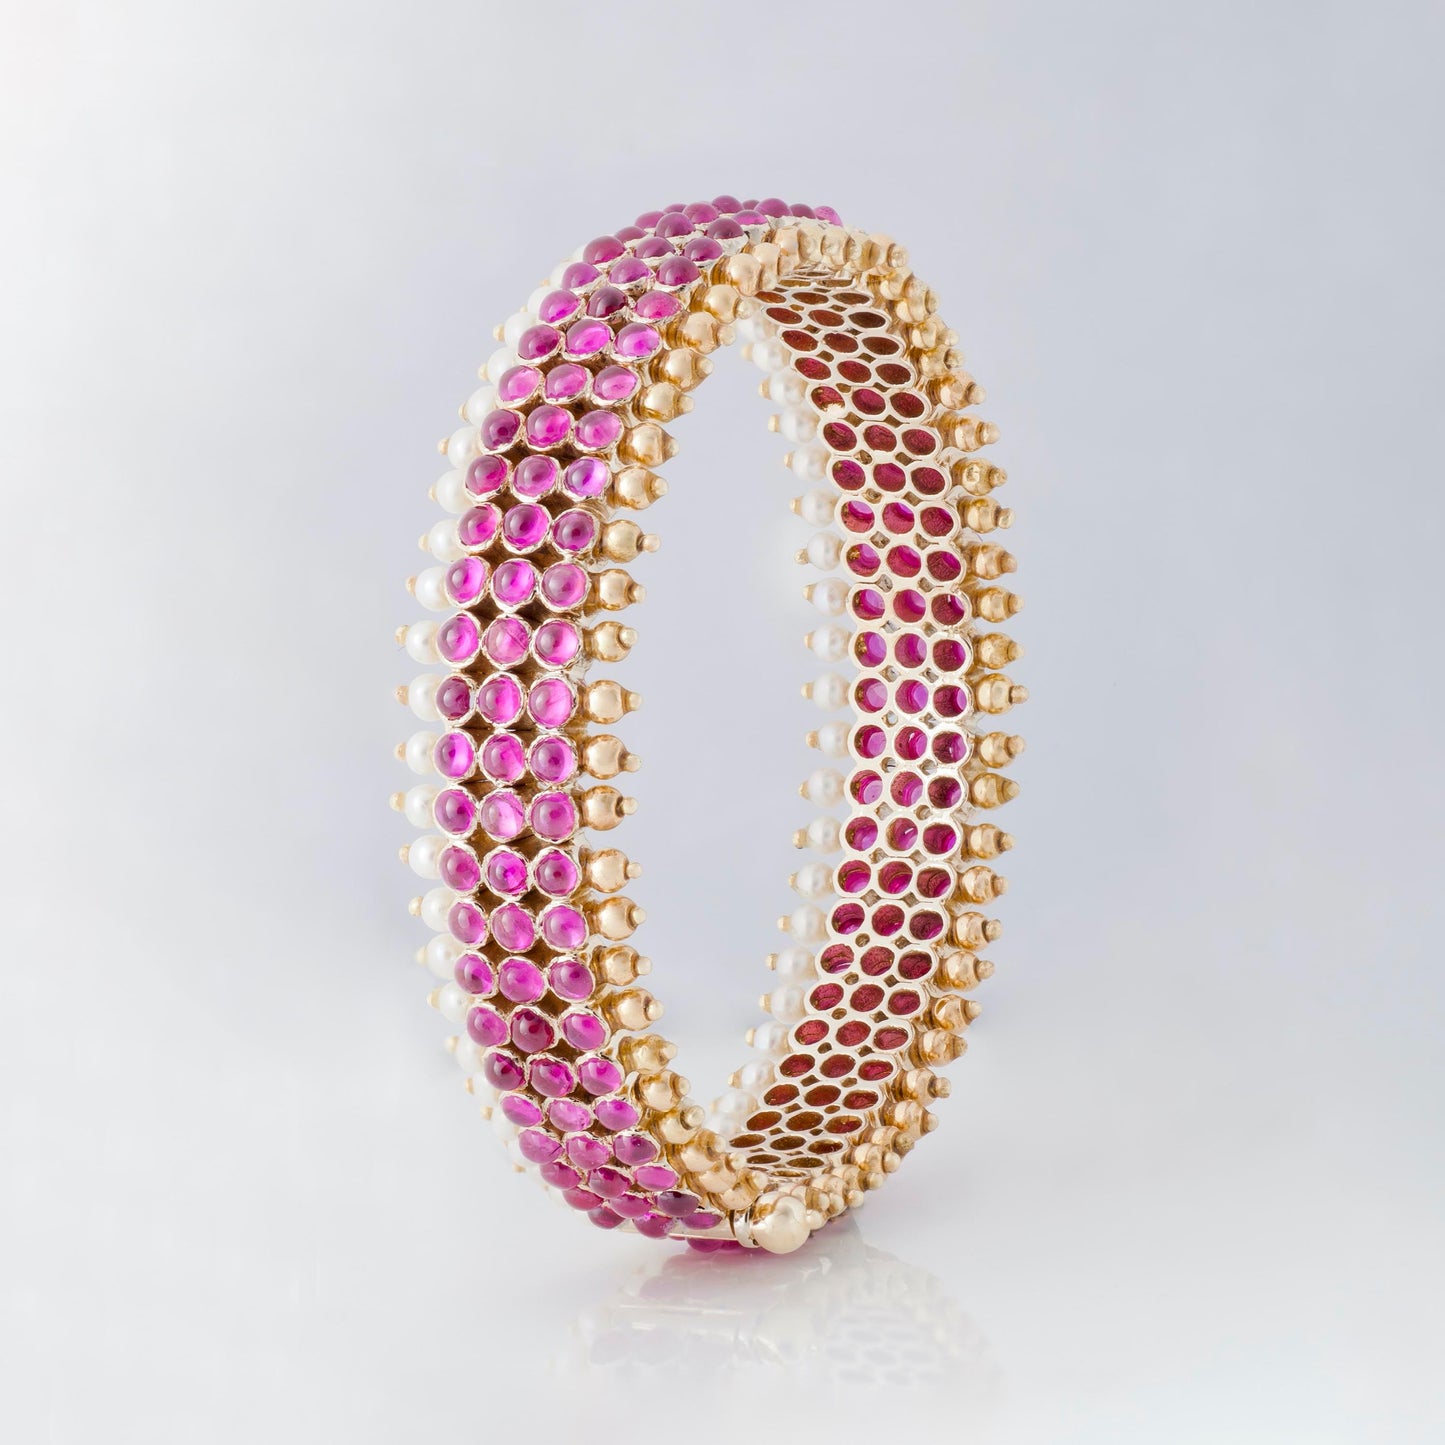 The Mathi Gold, Ruby and Pearl Bangle by Rasvihar